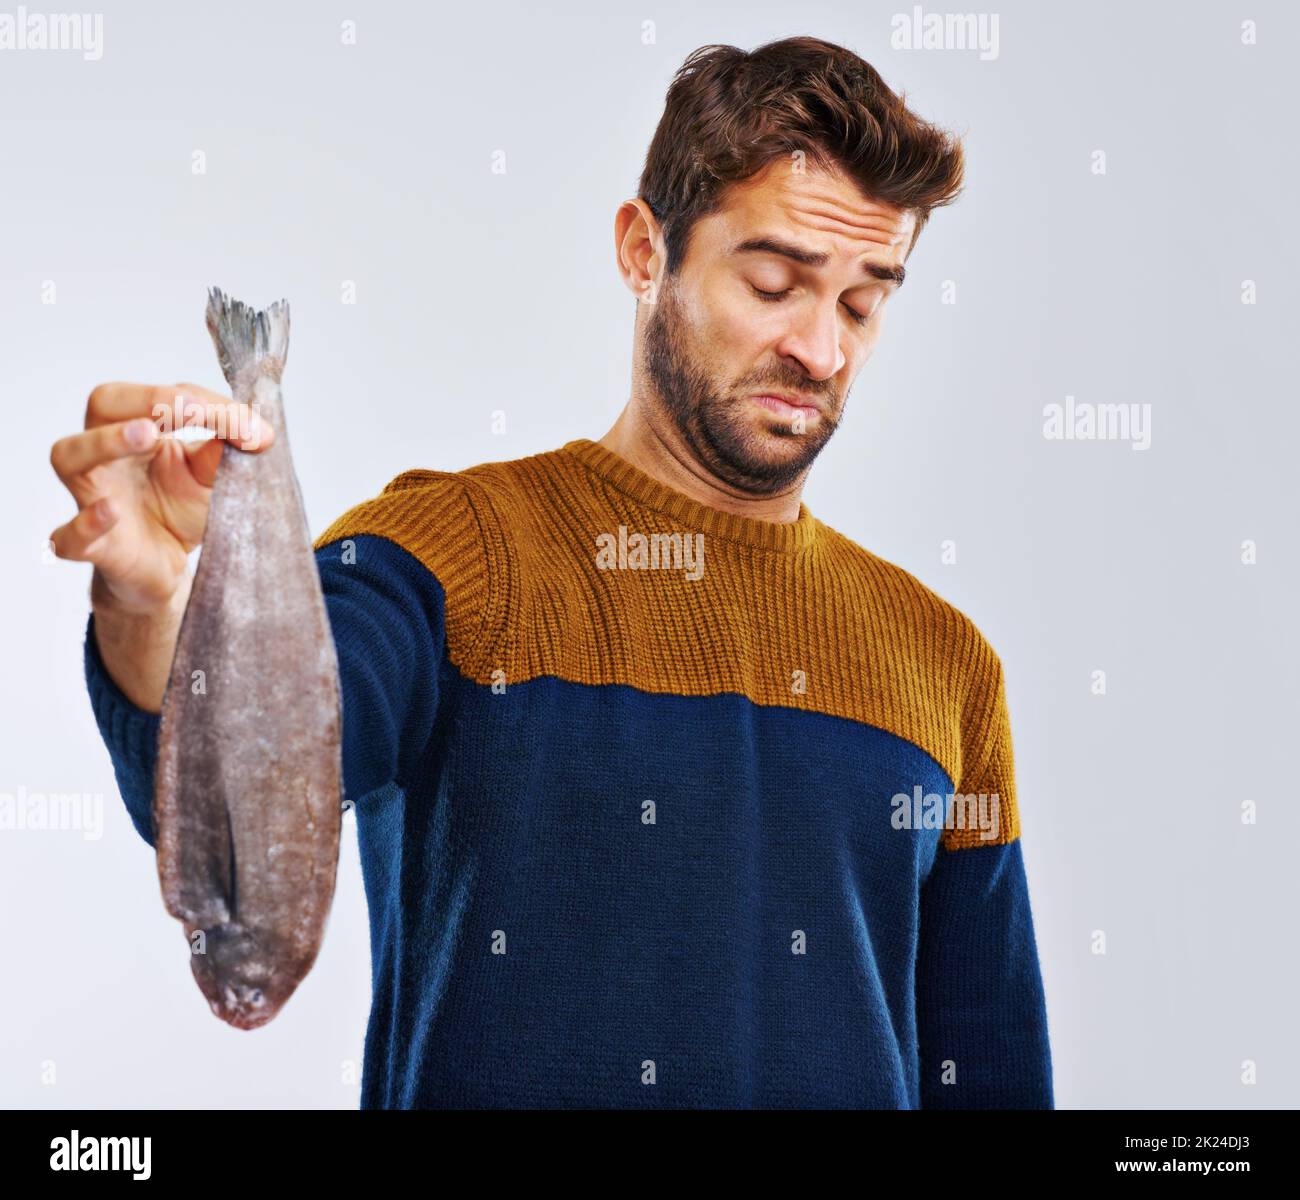 I hope it tastes better than it smells. Studio shot of a man showing disgust while holding a smelly fish. Stock Photo